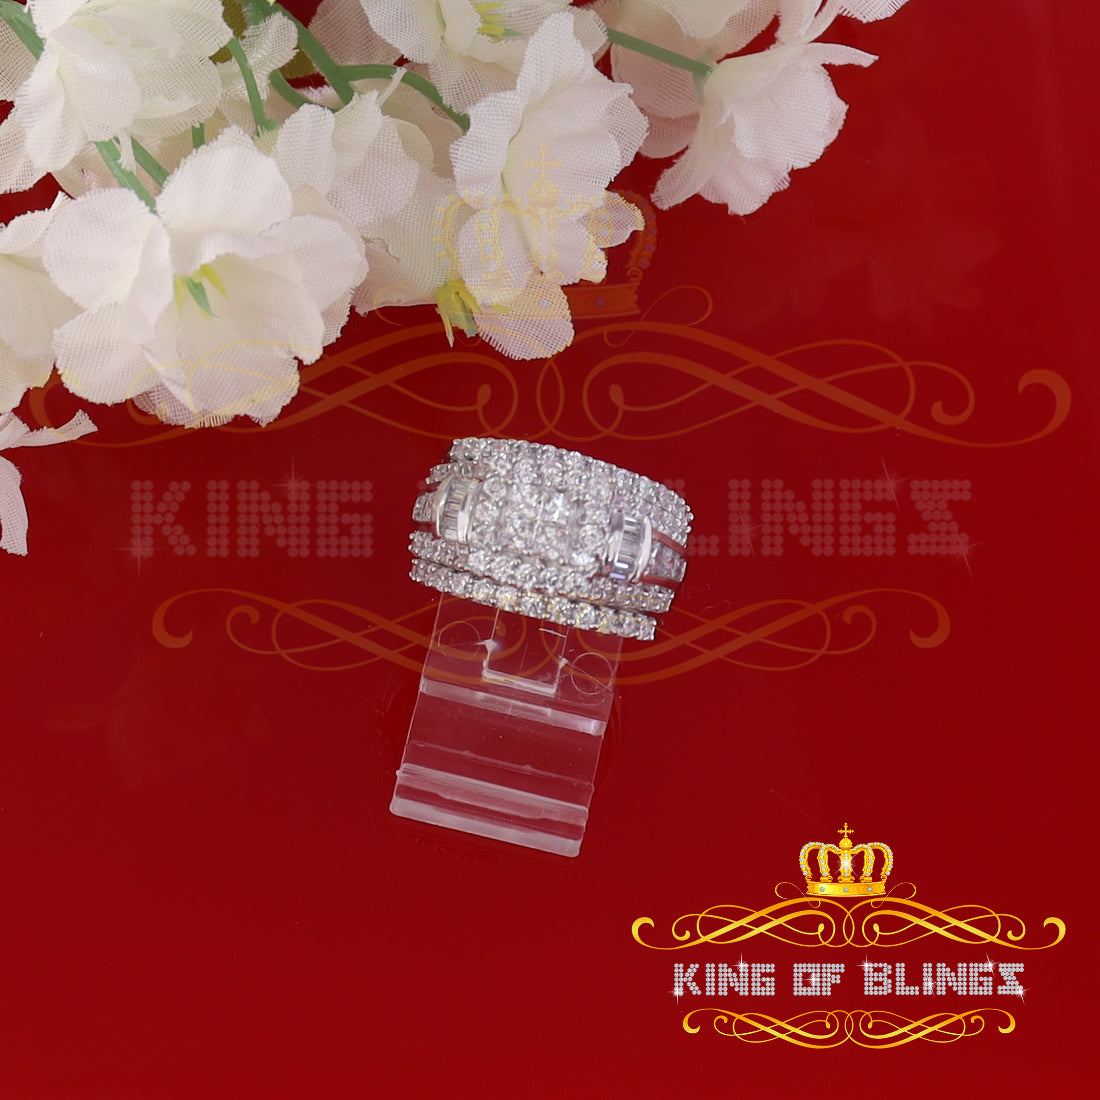 King Of Bling'sWhite 5.00ct Cubic Zirconia Silver 3 Piece Bridal Fashion Womens Ring size 7 KING OF BLINGS